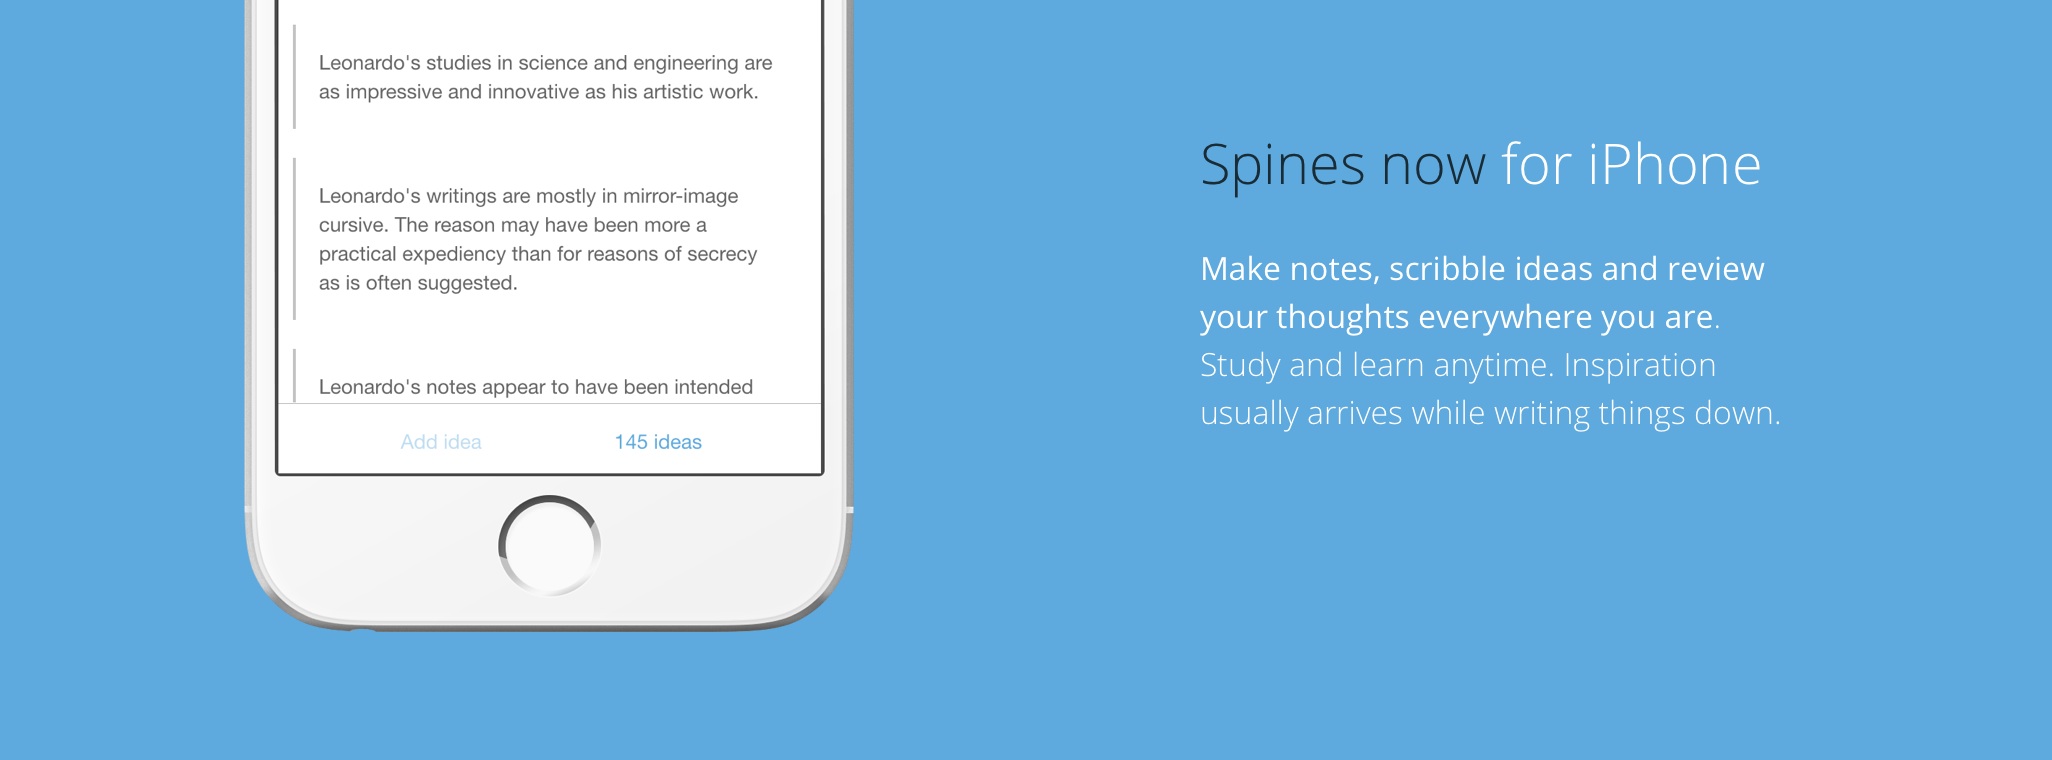 Introducing Spines now for iPhone